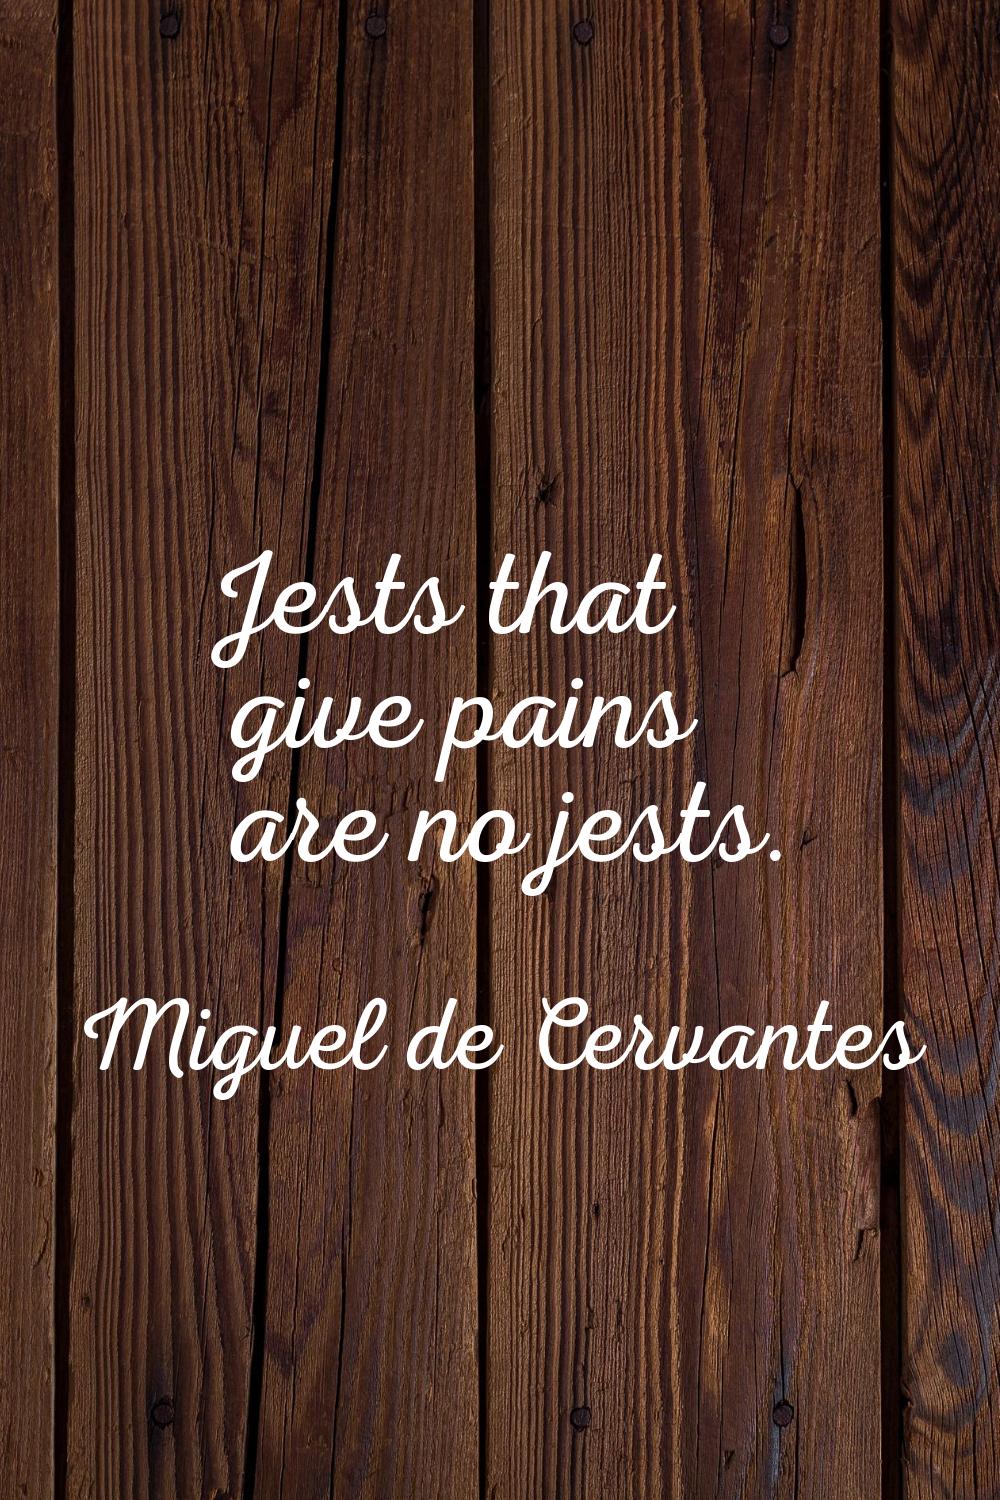 Jests that give pains are no jests.